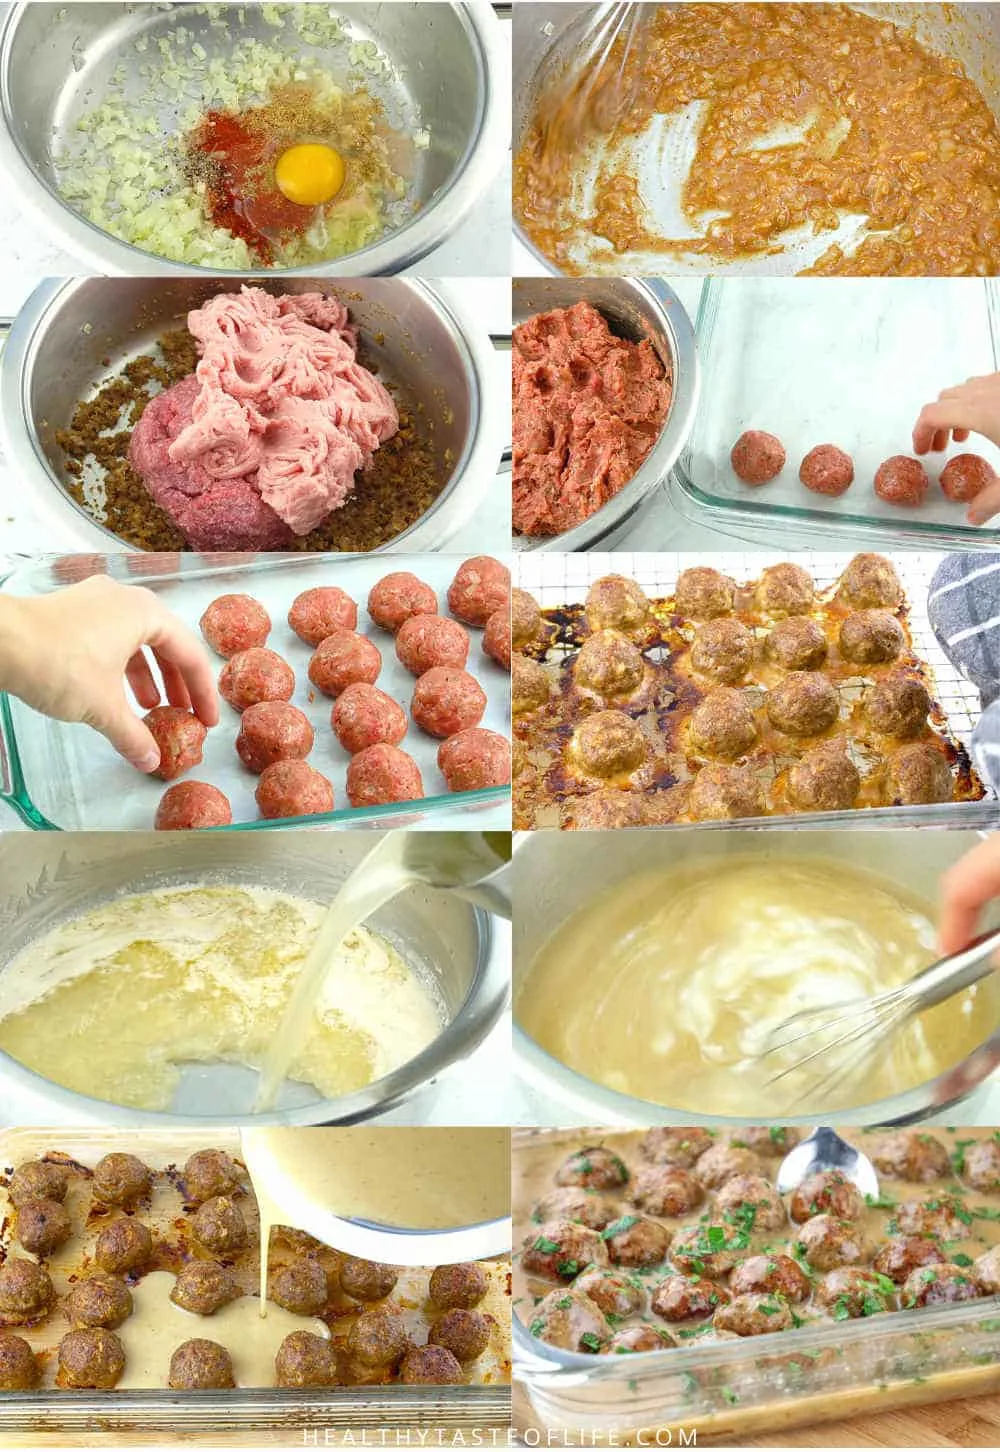 Process shots showing step by step method how to make Gluten Free Swedish Meatballs with Dairy Free Sauce or gravy.